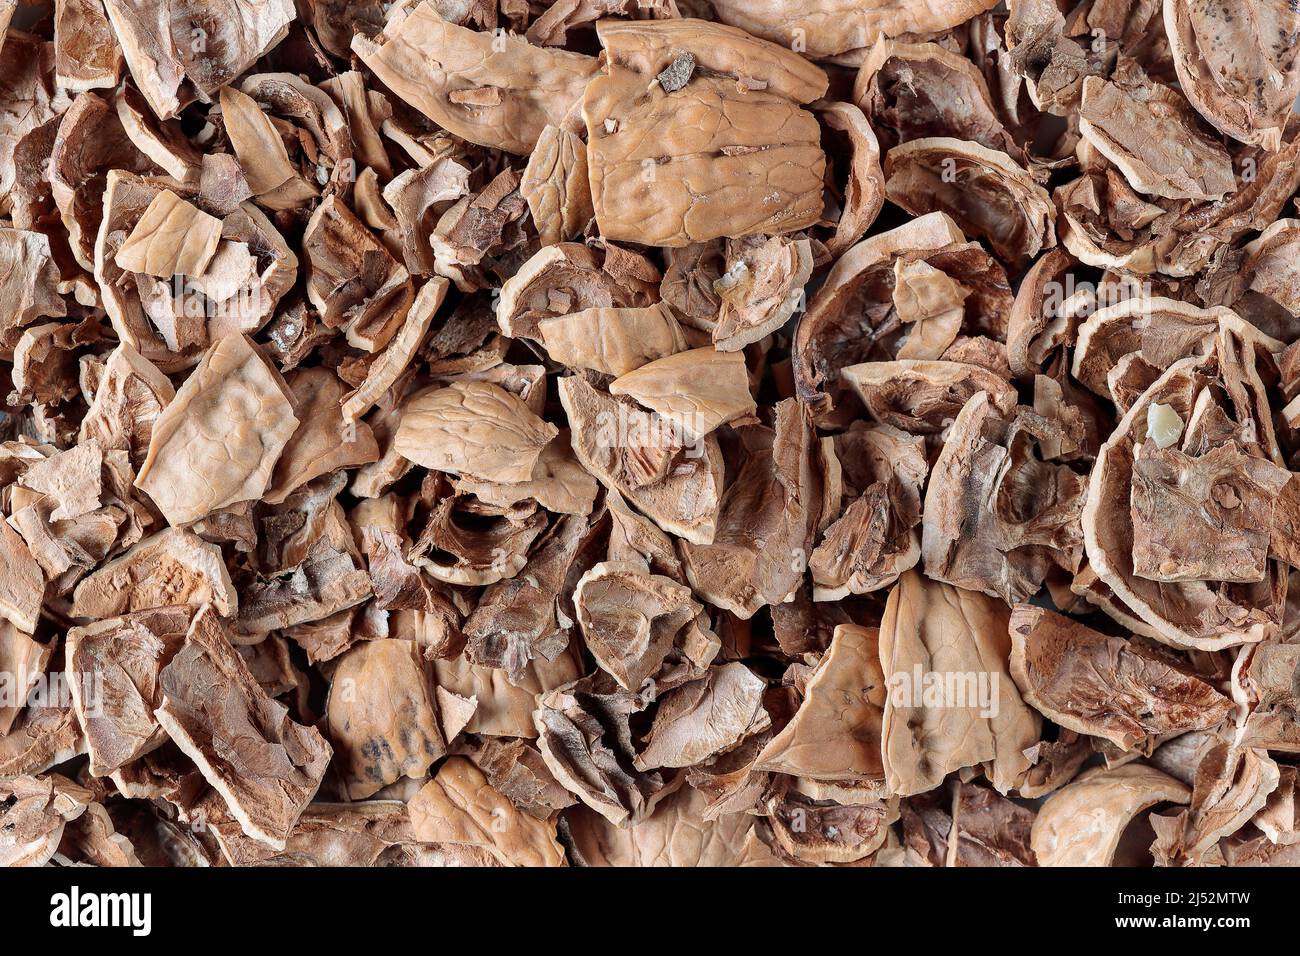 background with crushed walnut shells to be used as fertilizer for plants.  decomposing walnut shells release nutrients such as iron. zinc, potassium  Stock Photo - Alamy